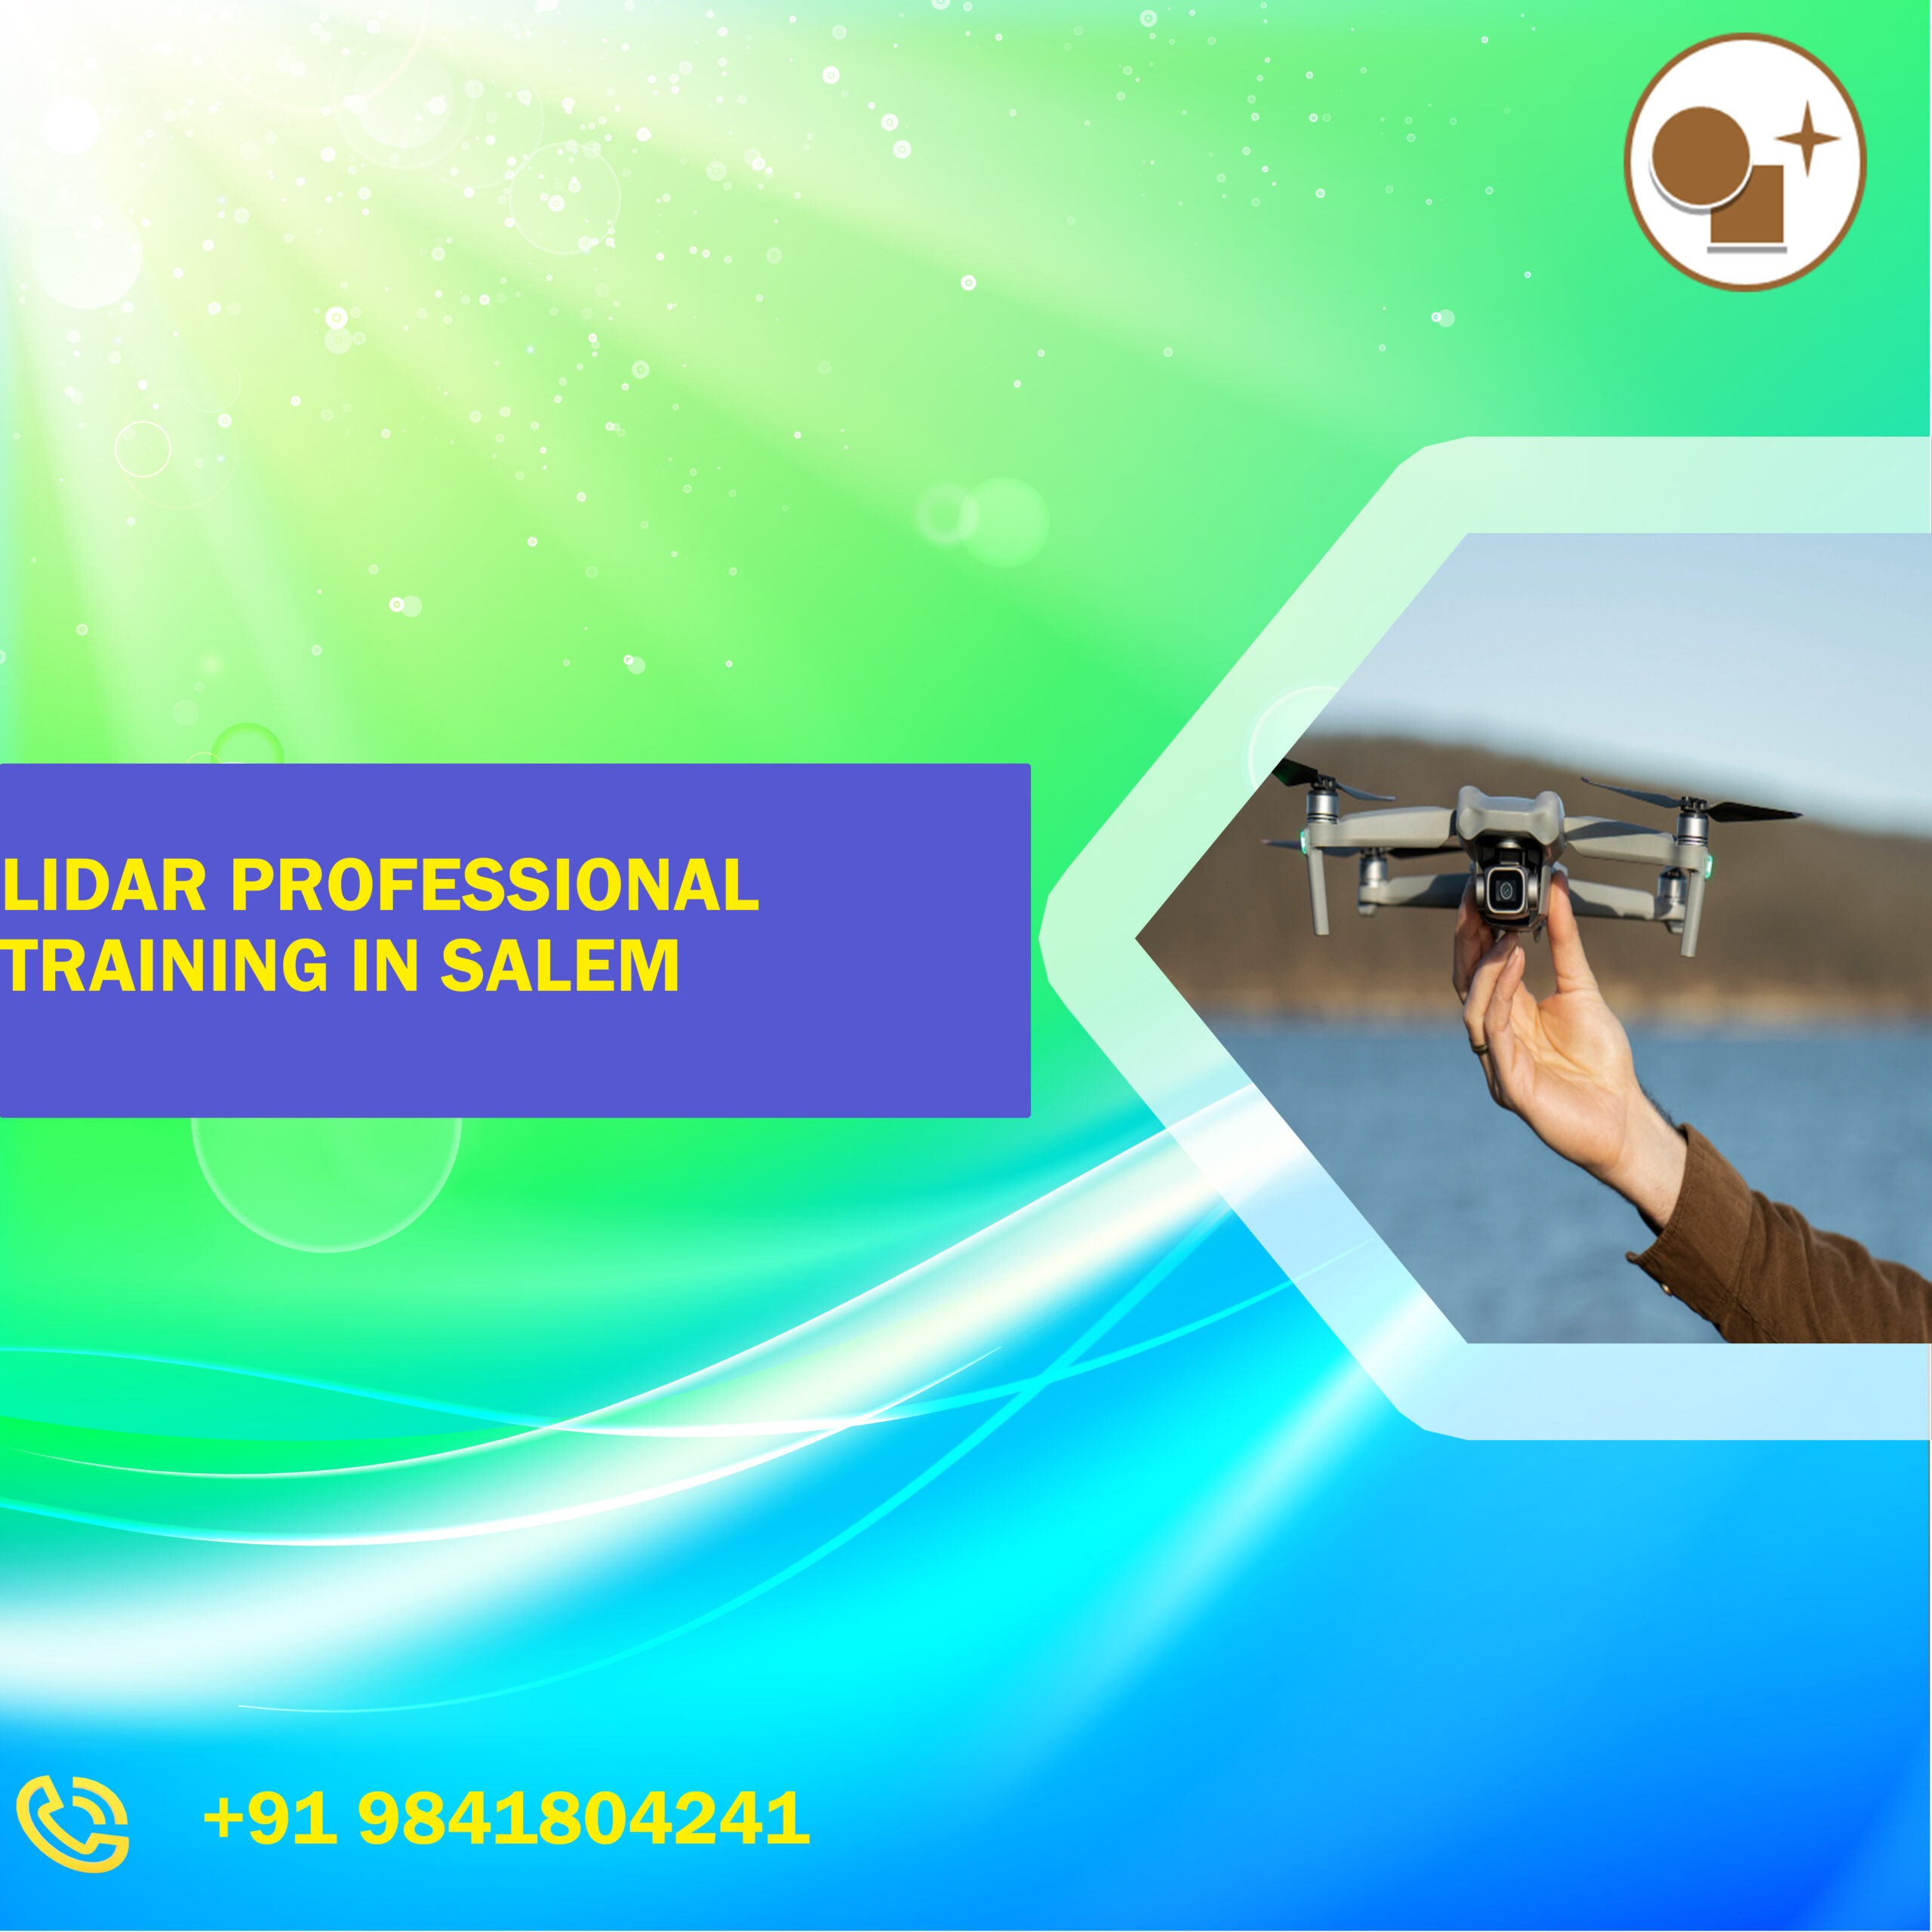 Advance Your Skills with Lidar Professional Training in Salem